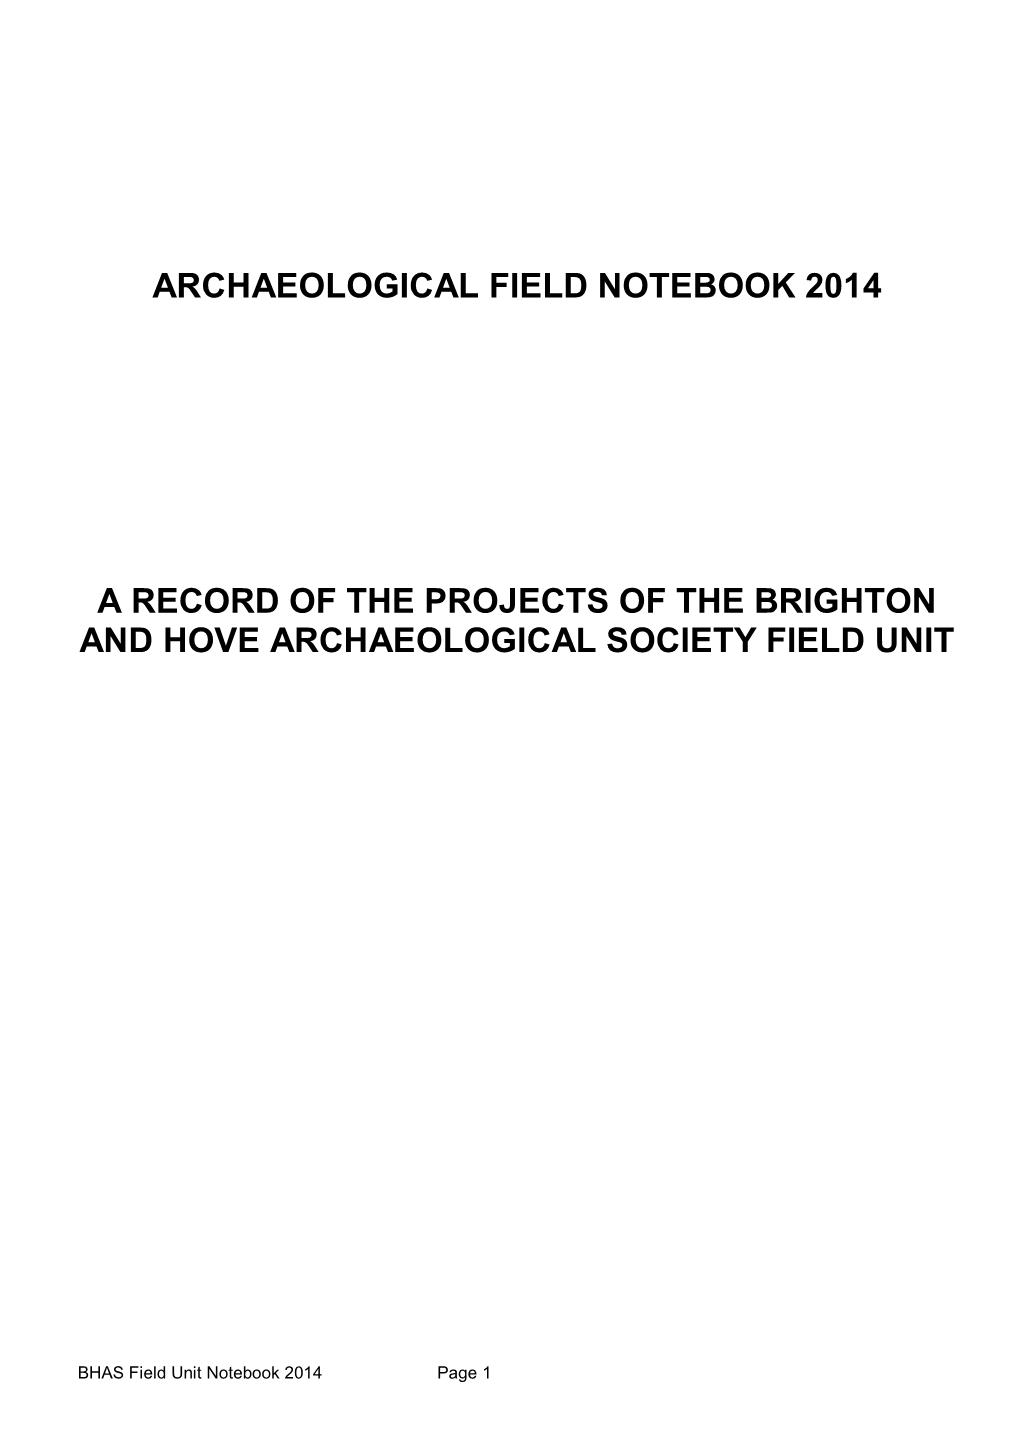 Archaeological Field Notebook 2014 a Record of the Projects of the Brighton